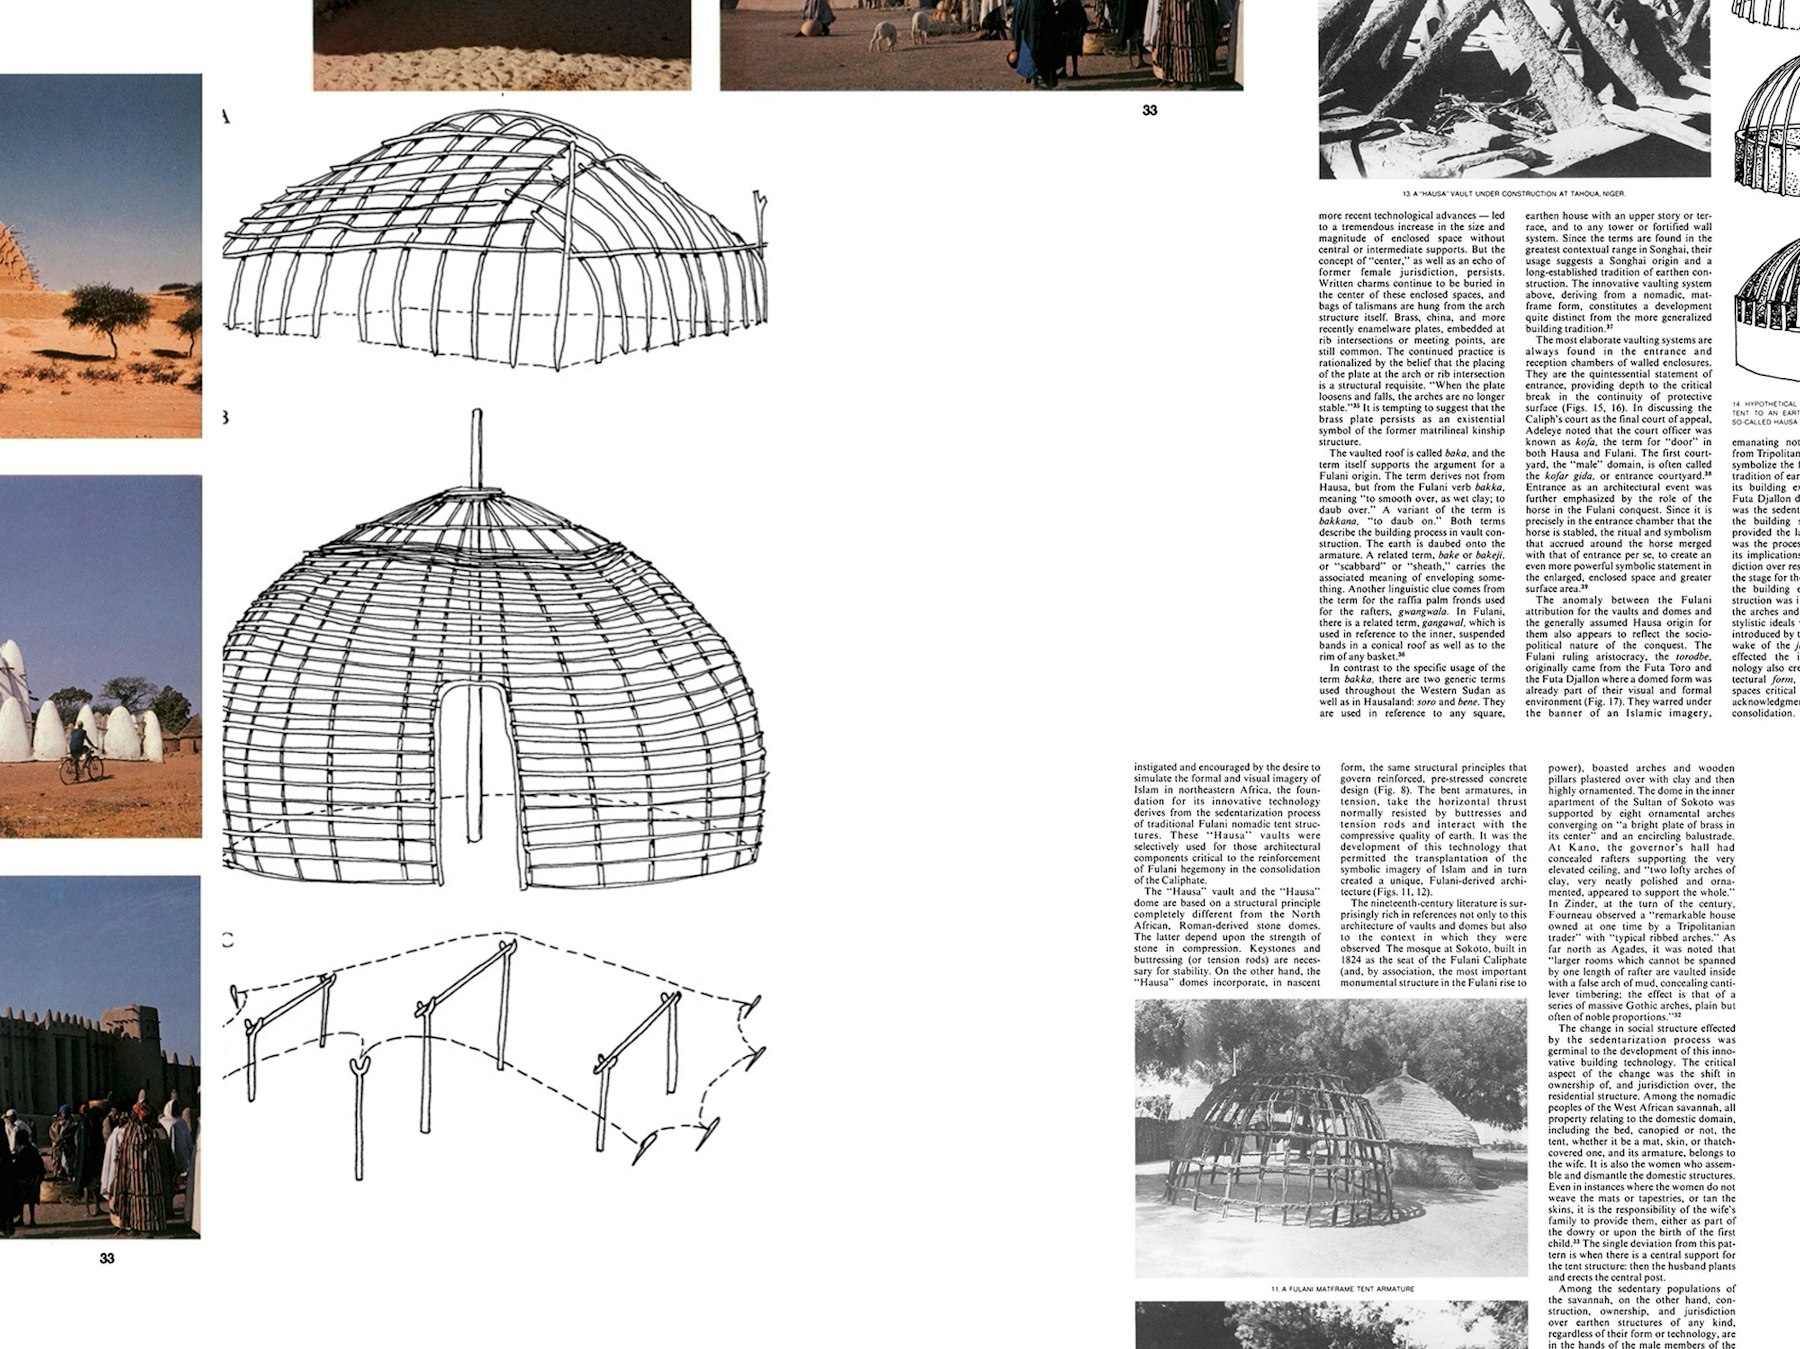 Recommended Reading: Labelle Prussin on African Nomadic Architecture